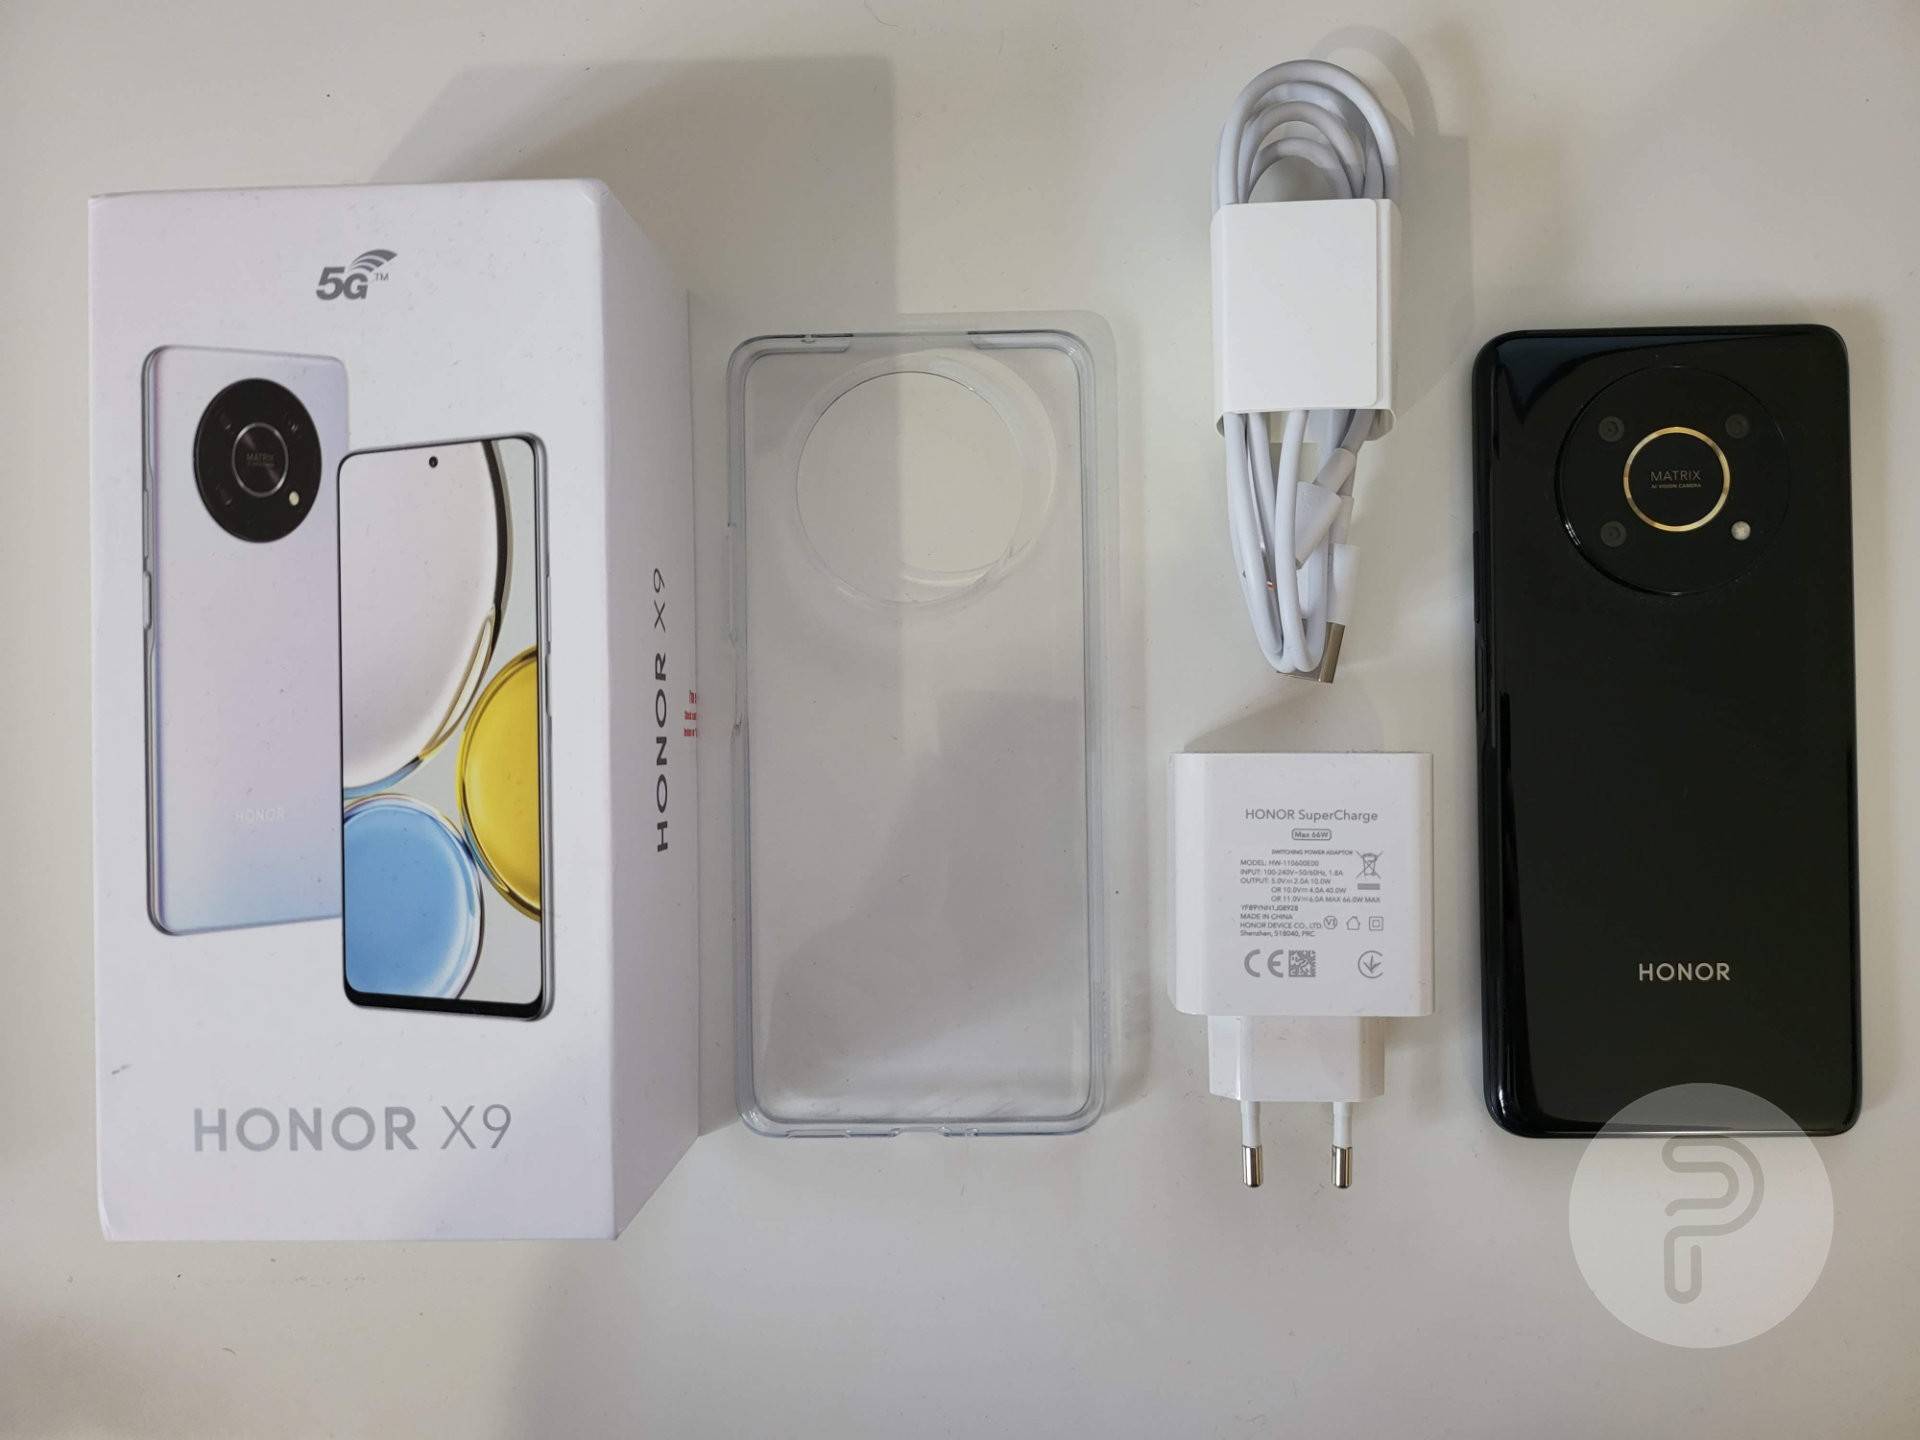 HONOR X9 5G box contents